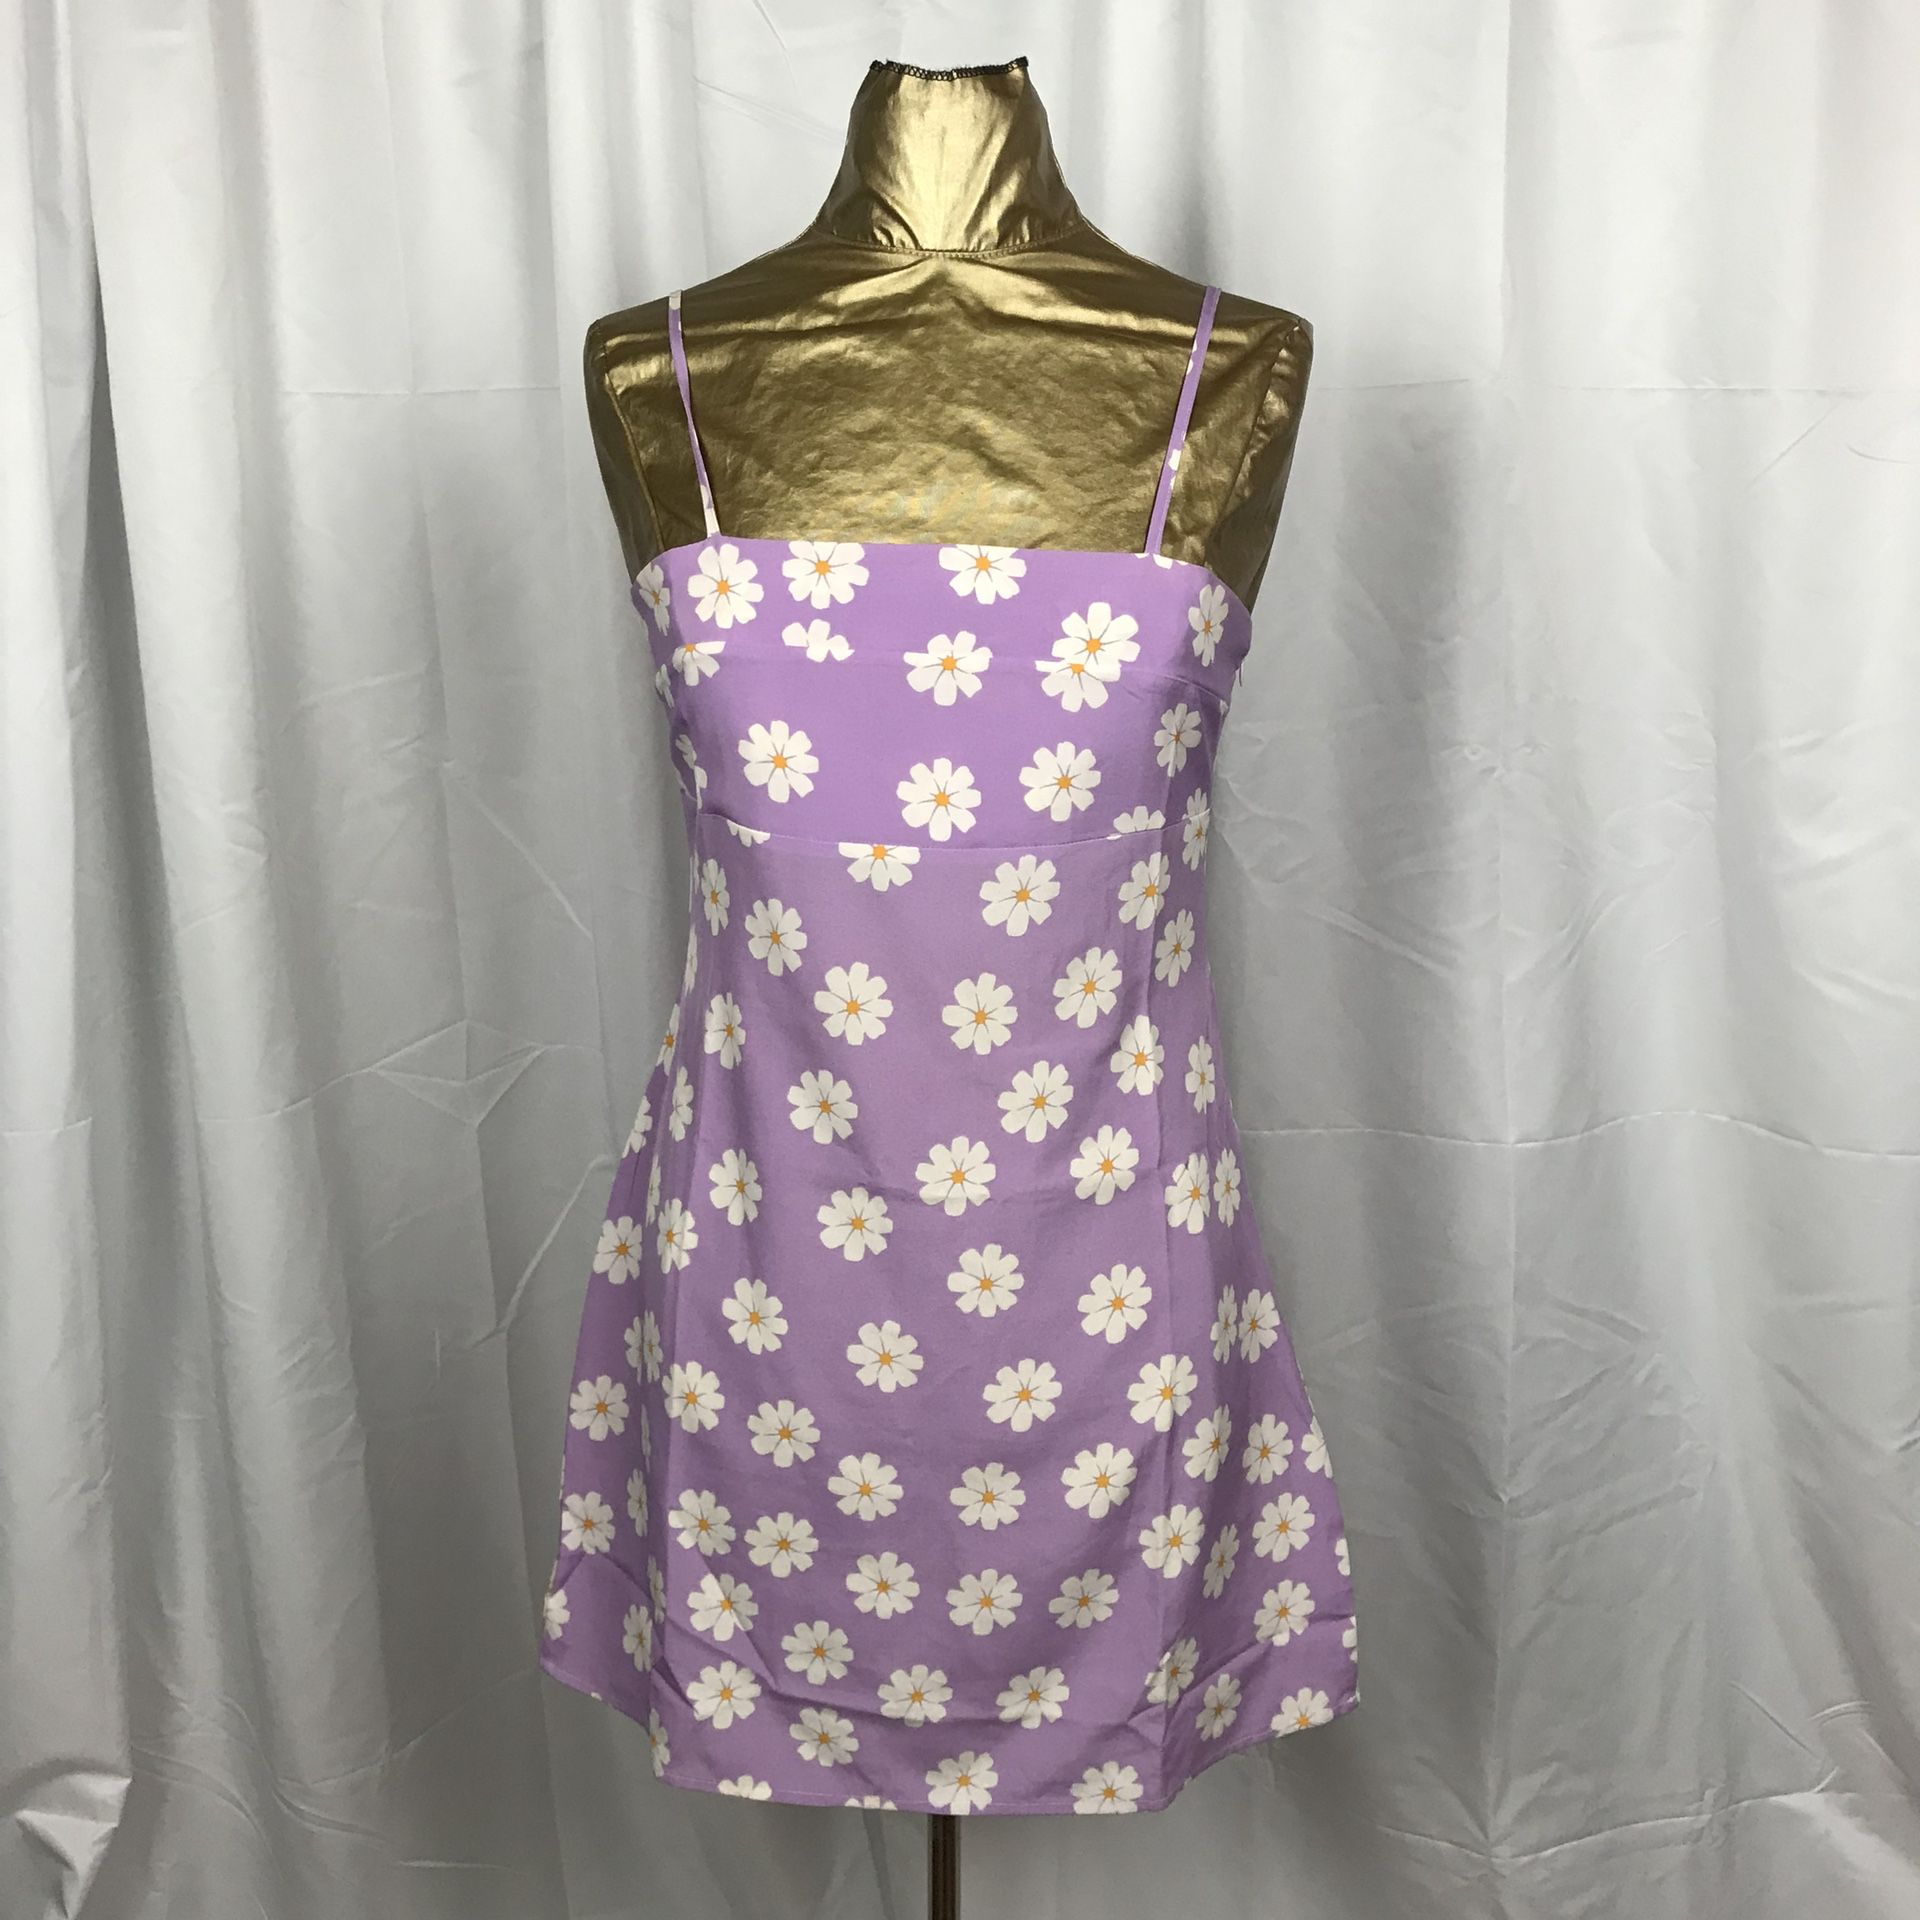 New Without Tags Women’s Sun Dress, Daisy Pattern On Lavender Background, Adjustable Straps, Shein Size L